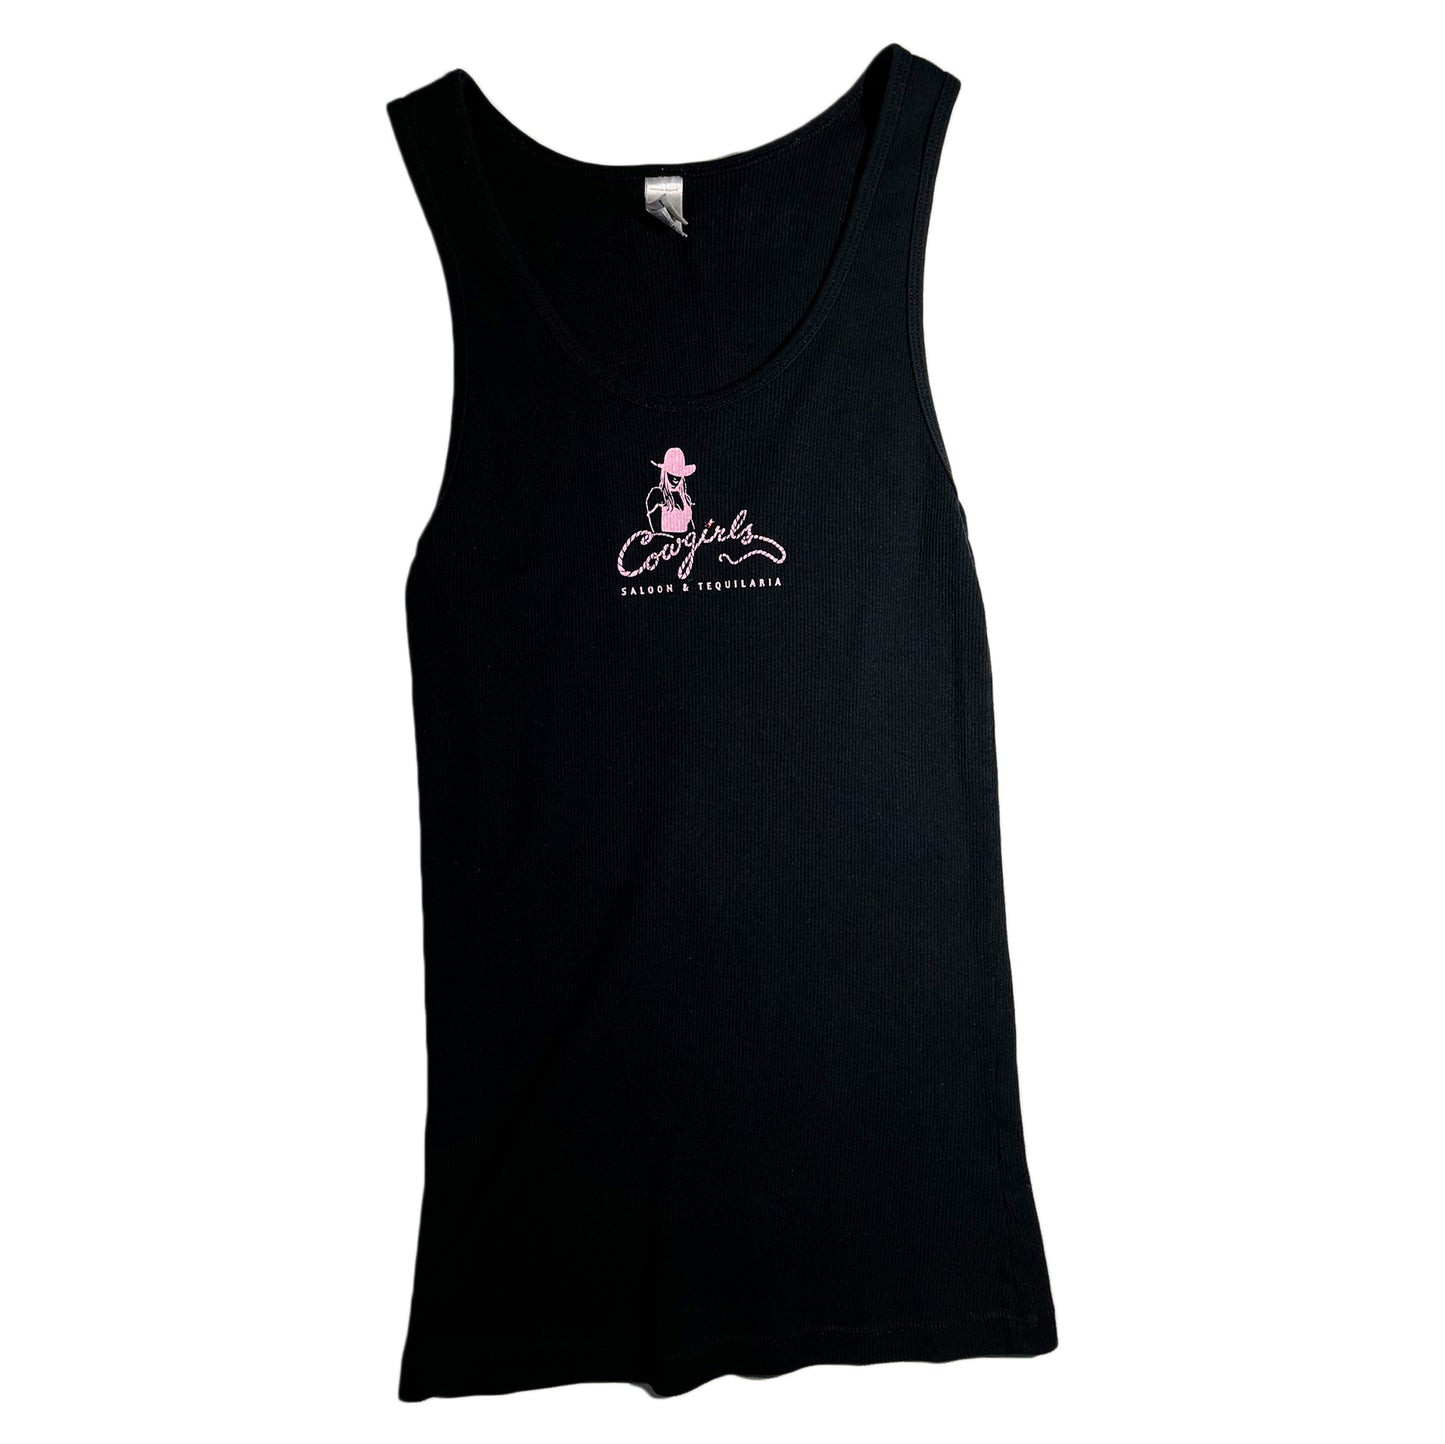 Vintage Cowgirls Tank Top Tequila